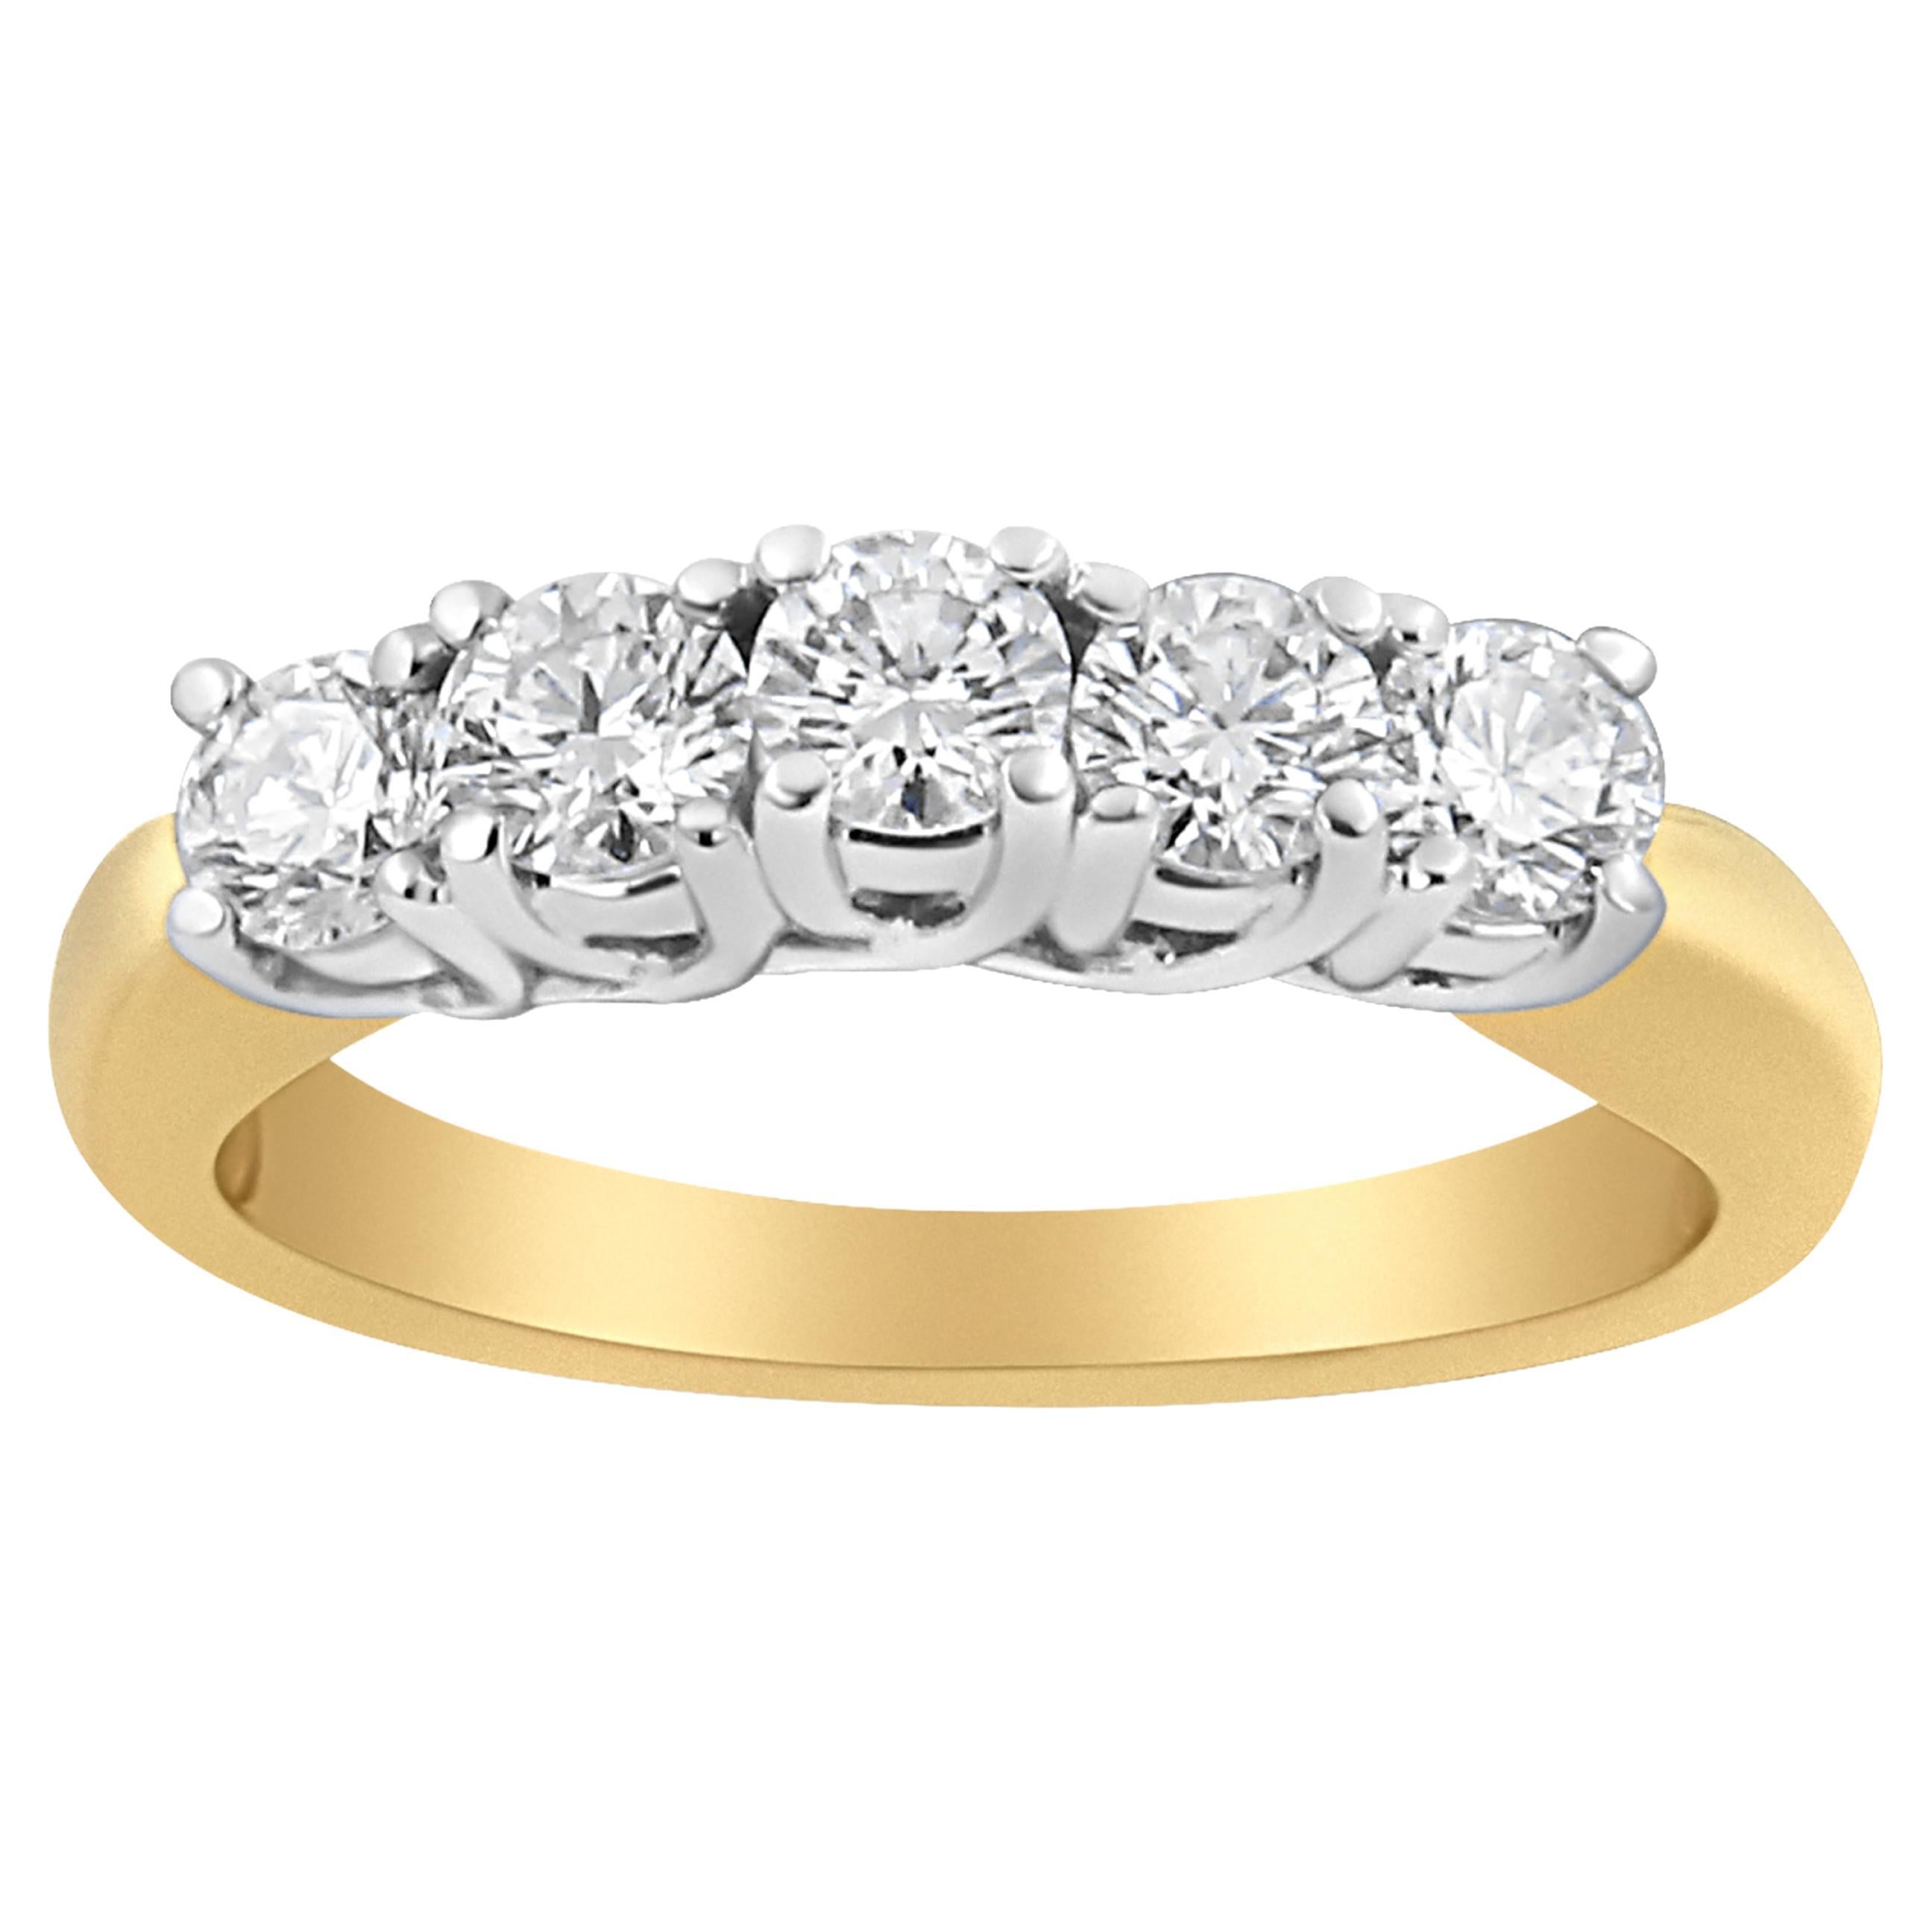 For Sale:  18K Yellow Gold 1.0 Carat 4 Prong Round Cut Diamond Step Up 5 Stone Ring Band